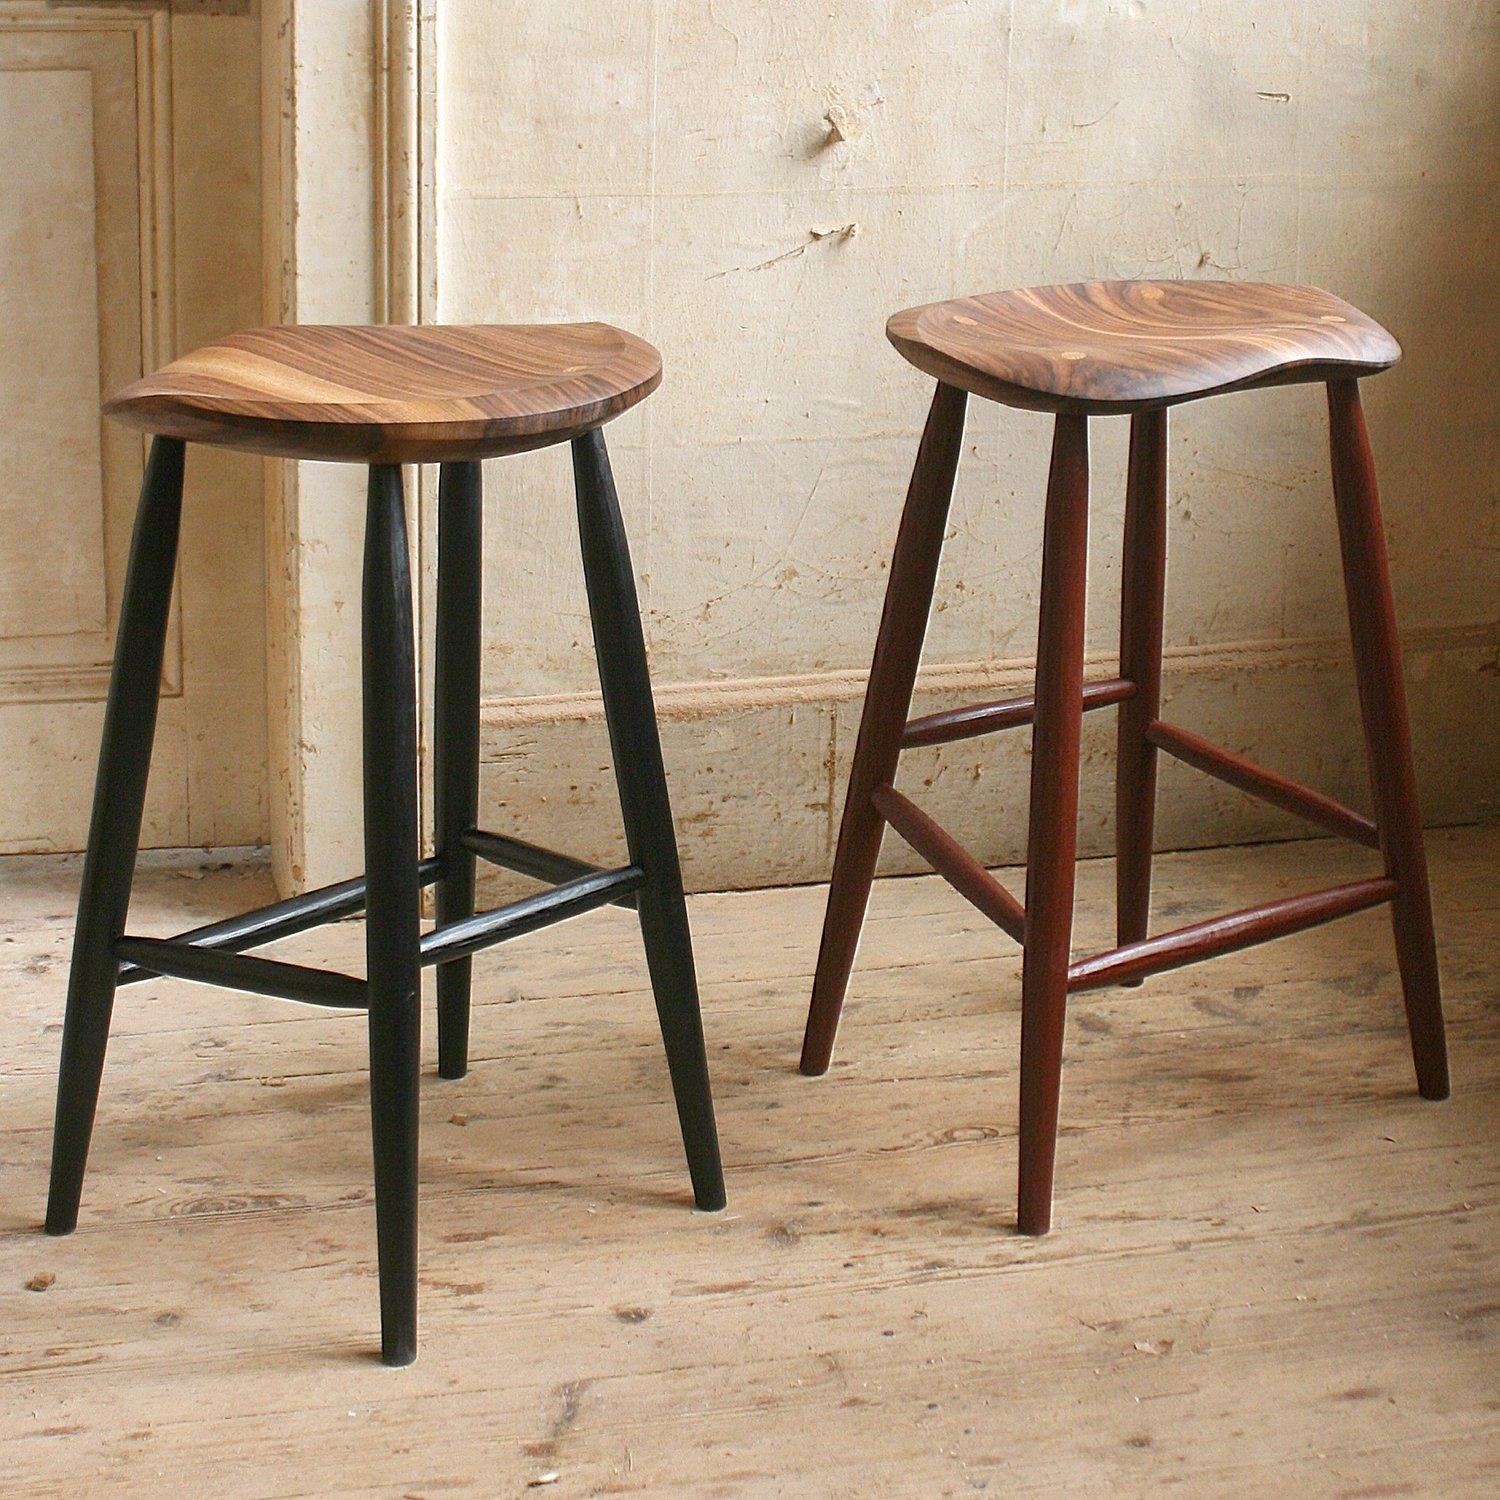 Wood Handcrafted Studio Three Legged Stool by Fabian Fischer, Germany, 2023 For Sale